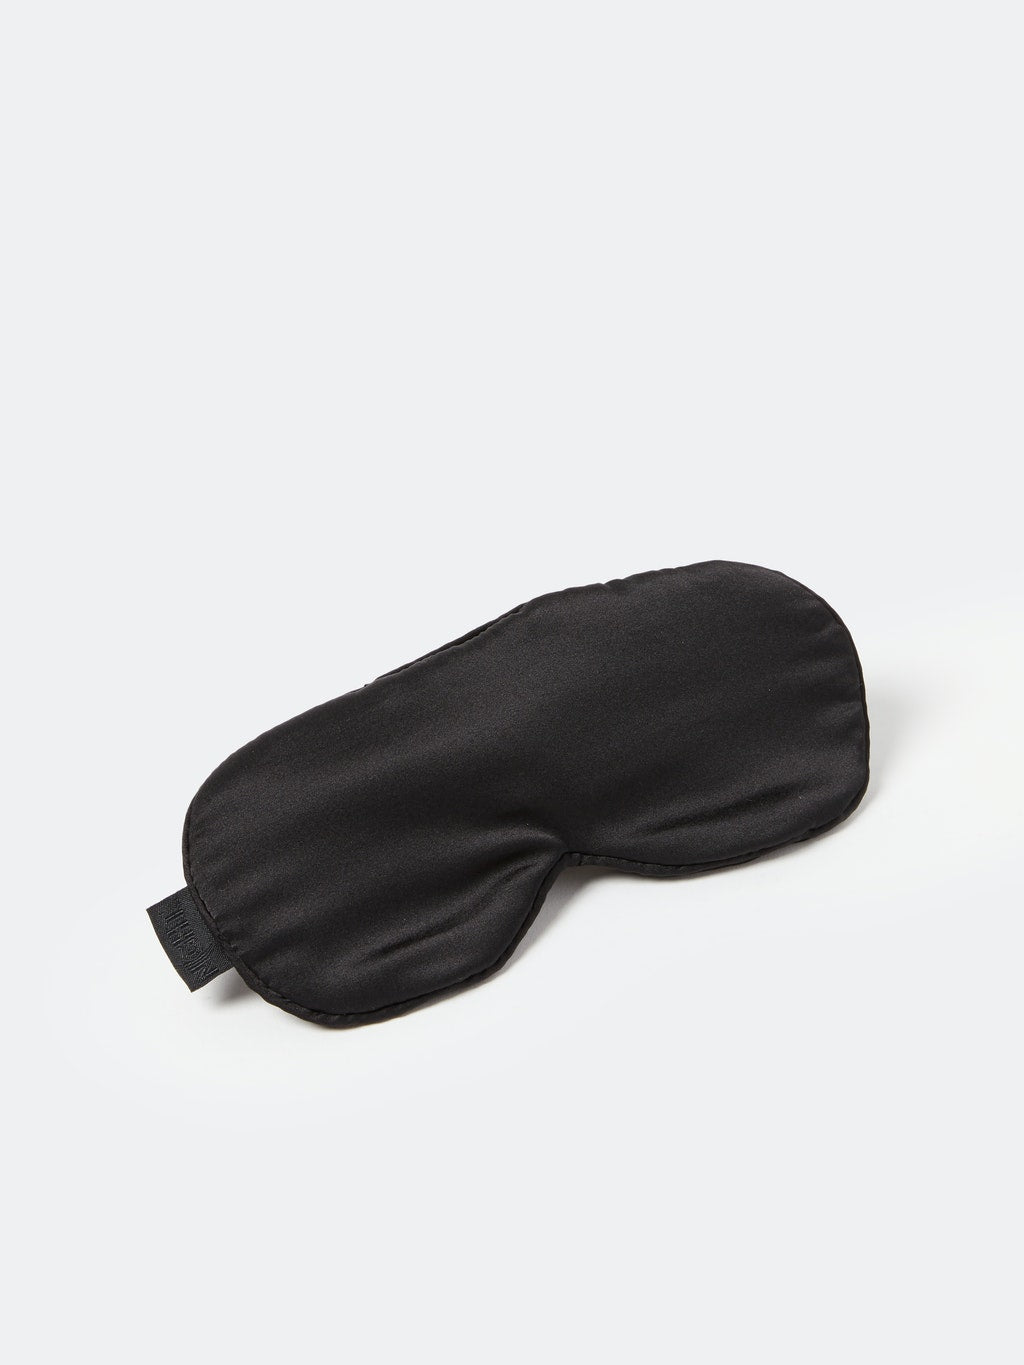 Silk Eye Mask with Cooling Gel Insert